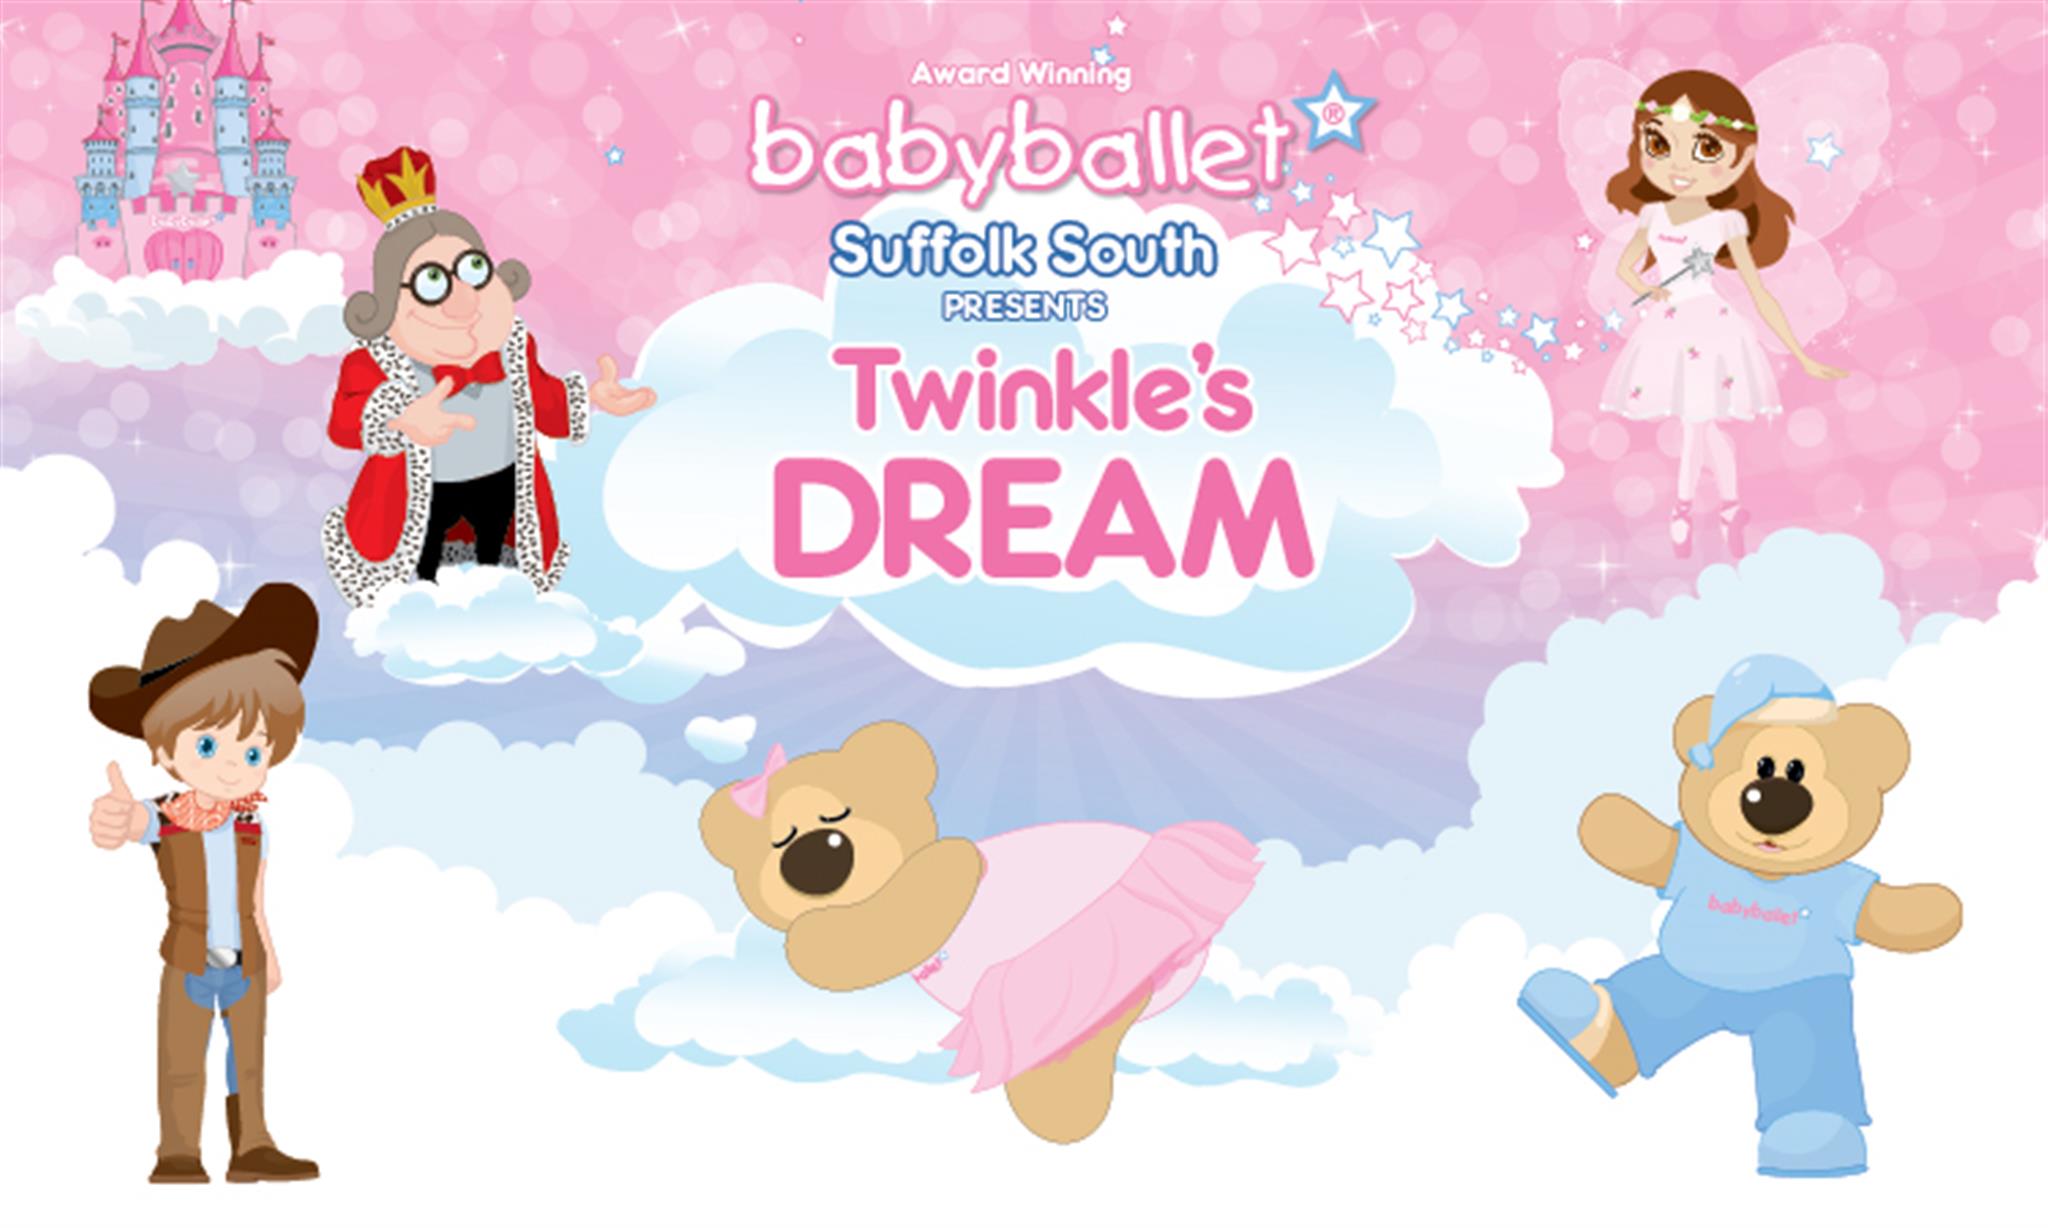 Twinkle's Dream by babyballet Suffolk South image